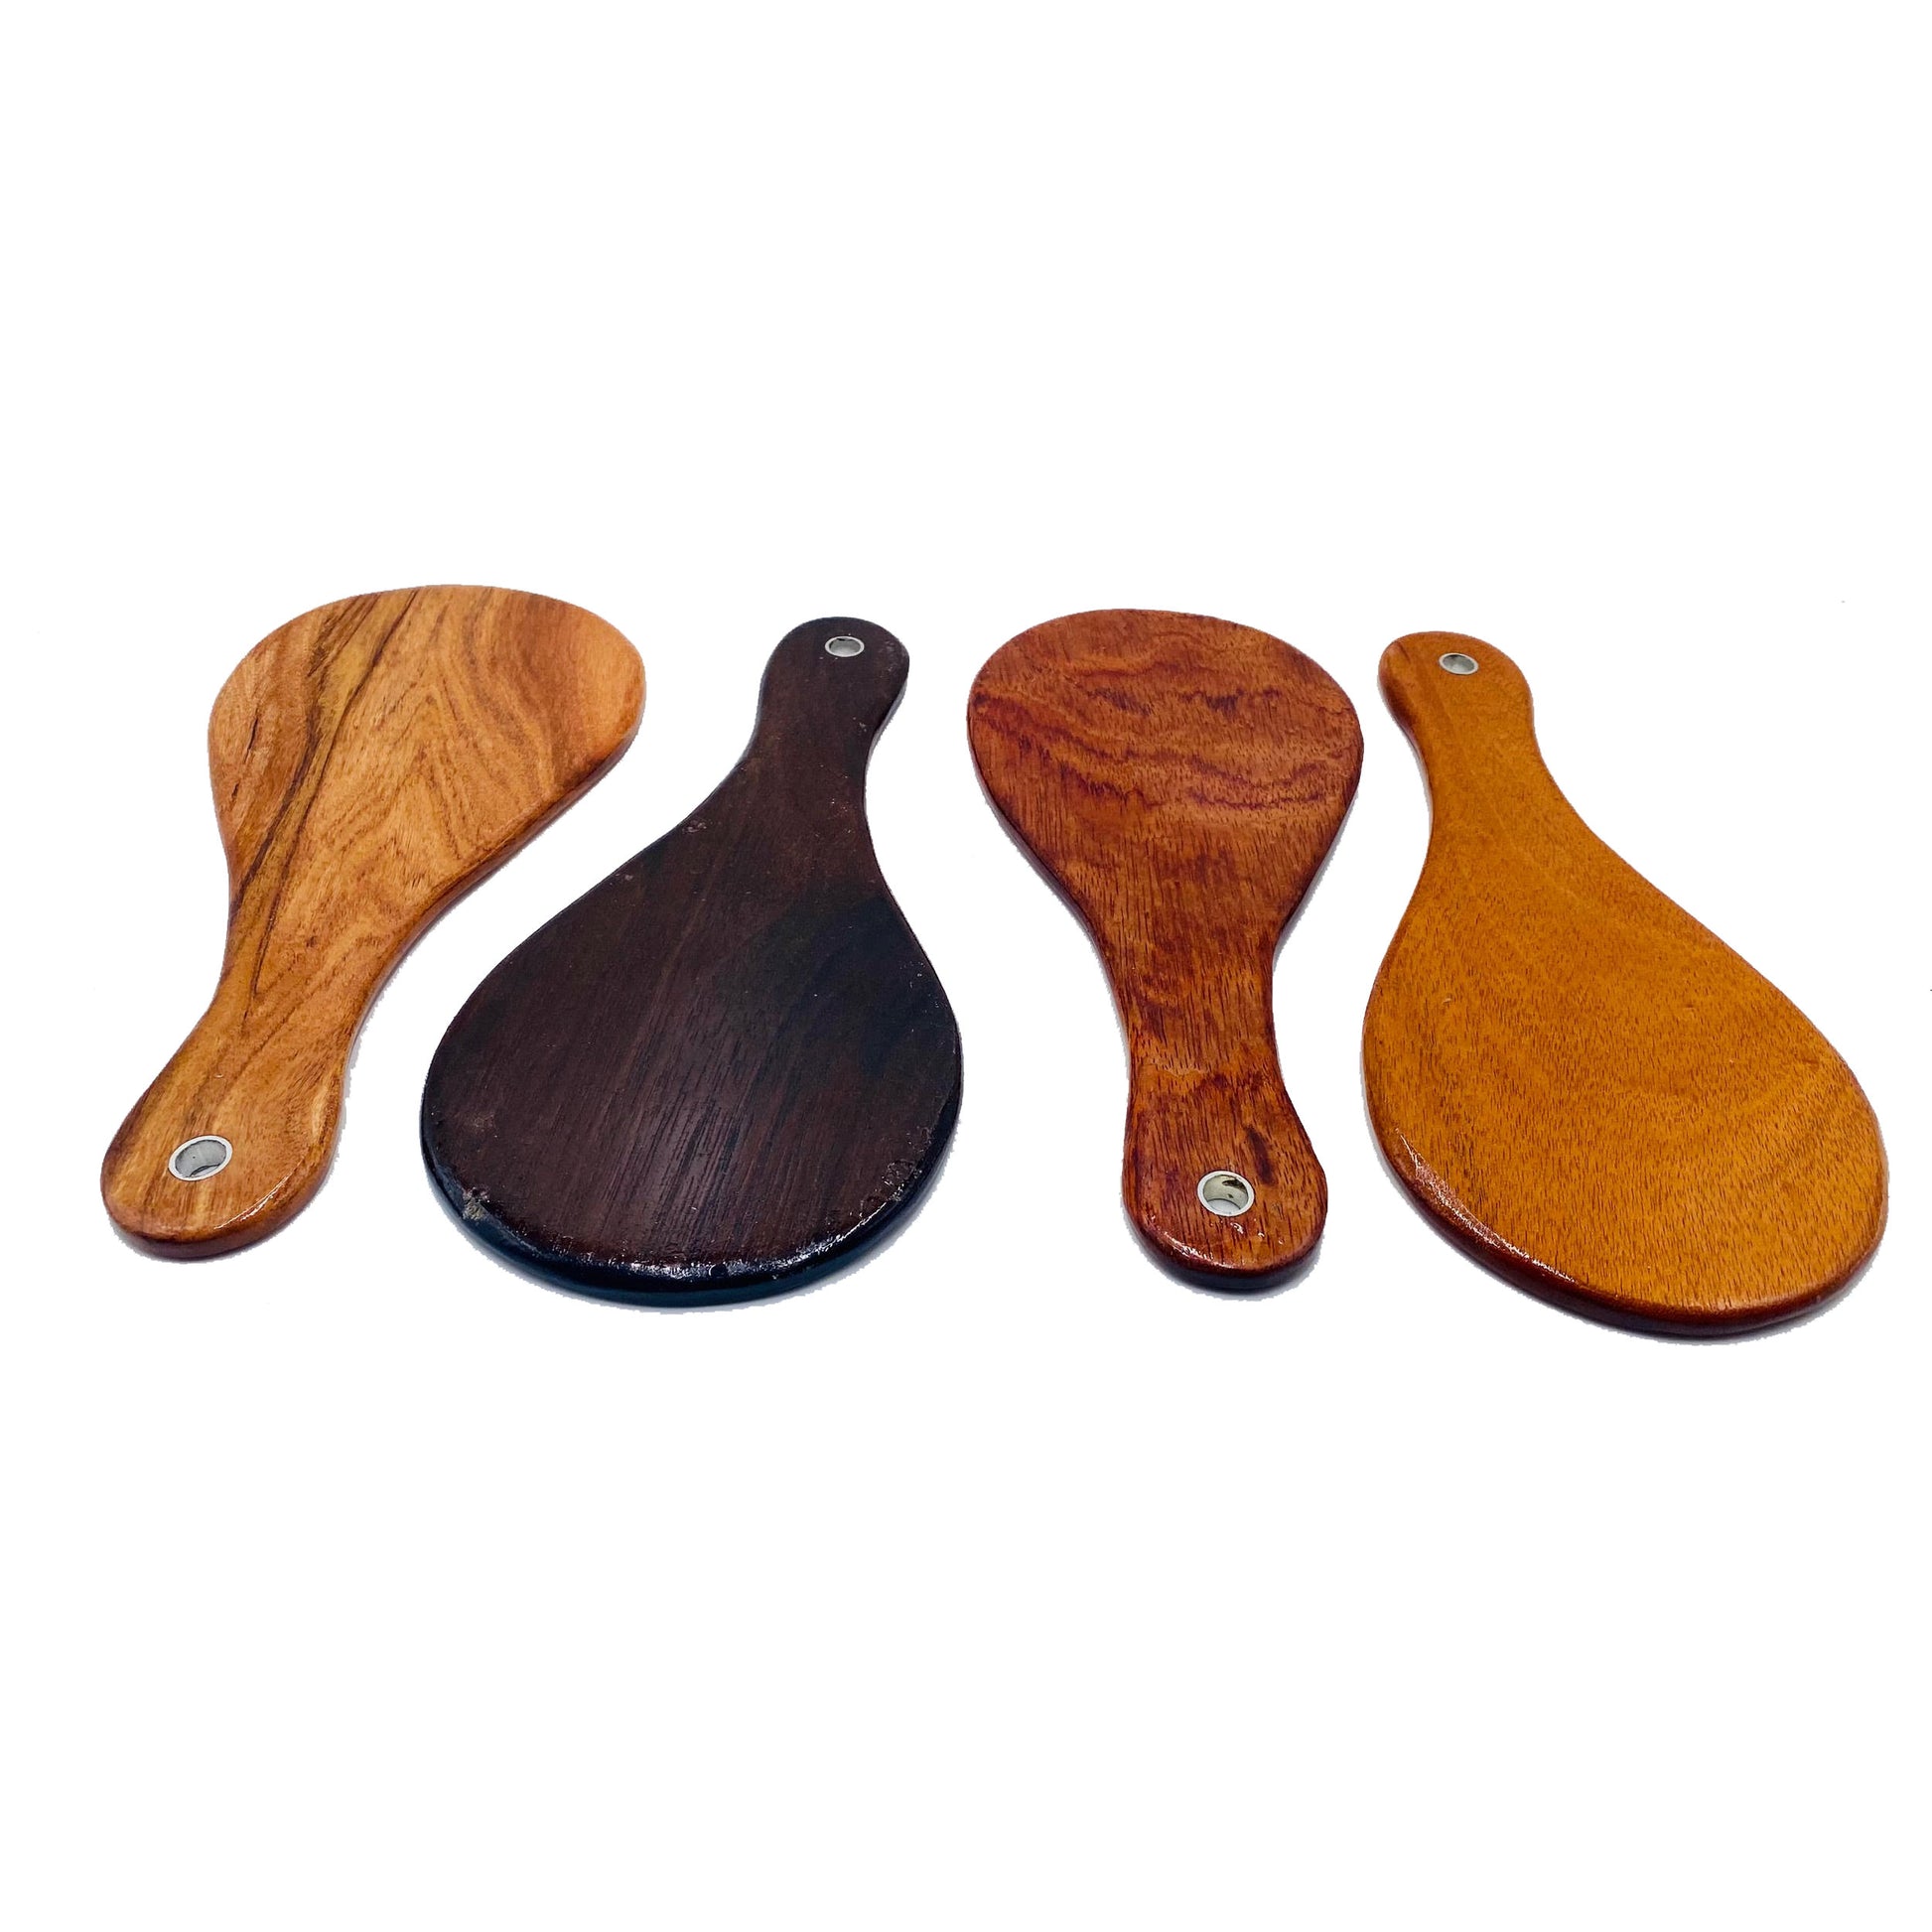 Master Control's Woodshop & Toys's Small Teardrop Spanking Paddle - This is a Handmade upon order product. The product usually takes 7-10 days to create. This Small Teardrop Spanking Paddle never fails to get an "ouch" of appreciation! Available in severa